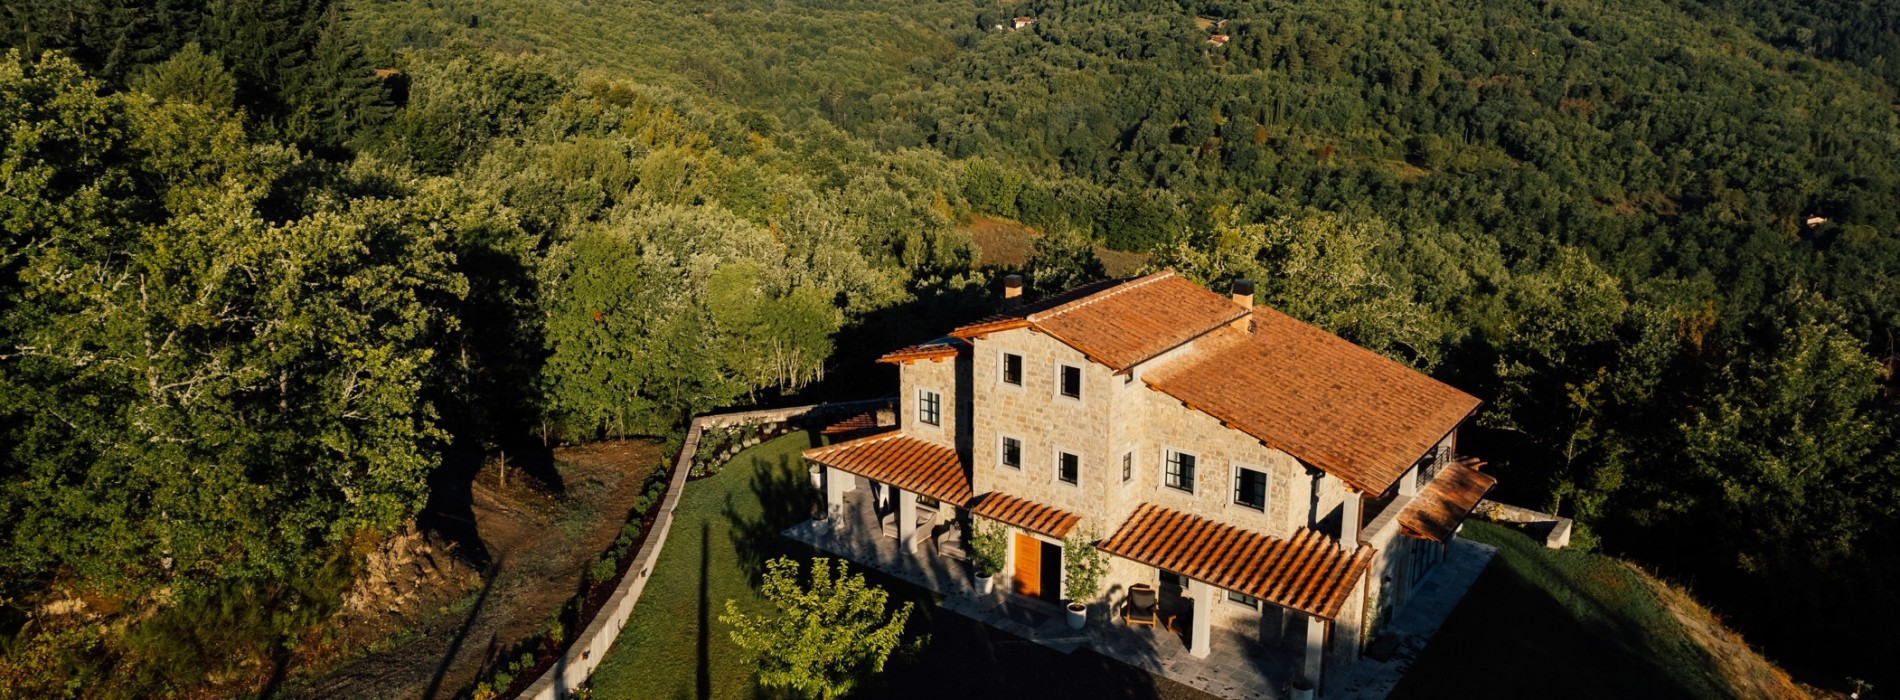 Nestled in the beautiful Casentino valley, one hour south of Florence